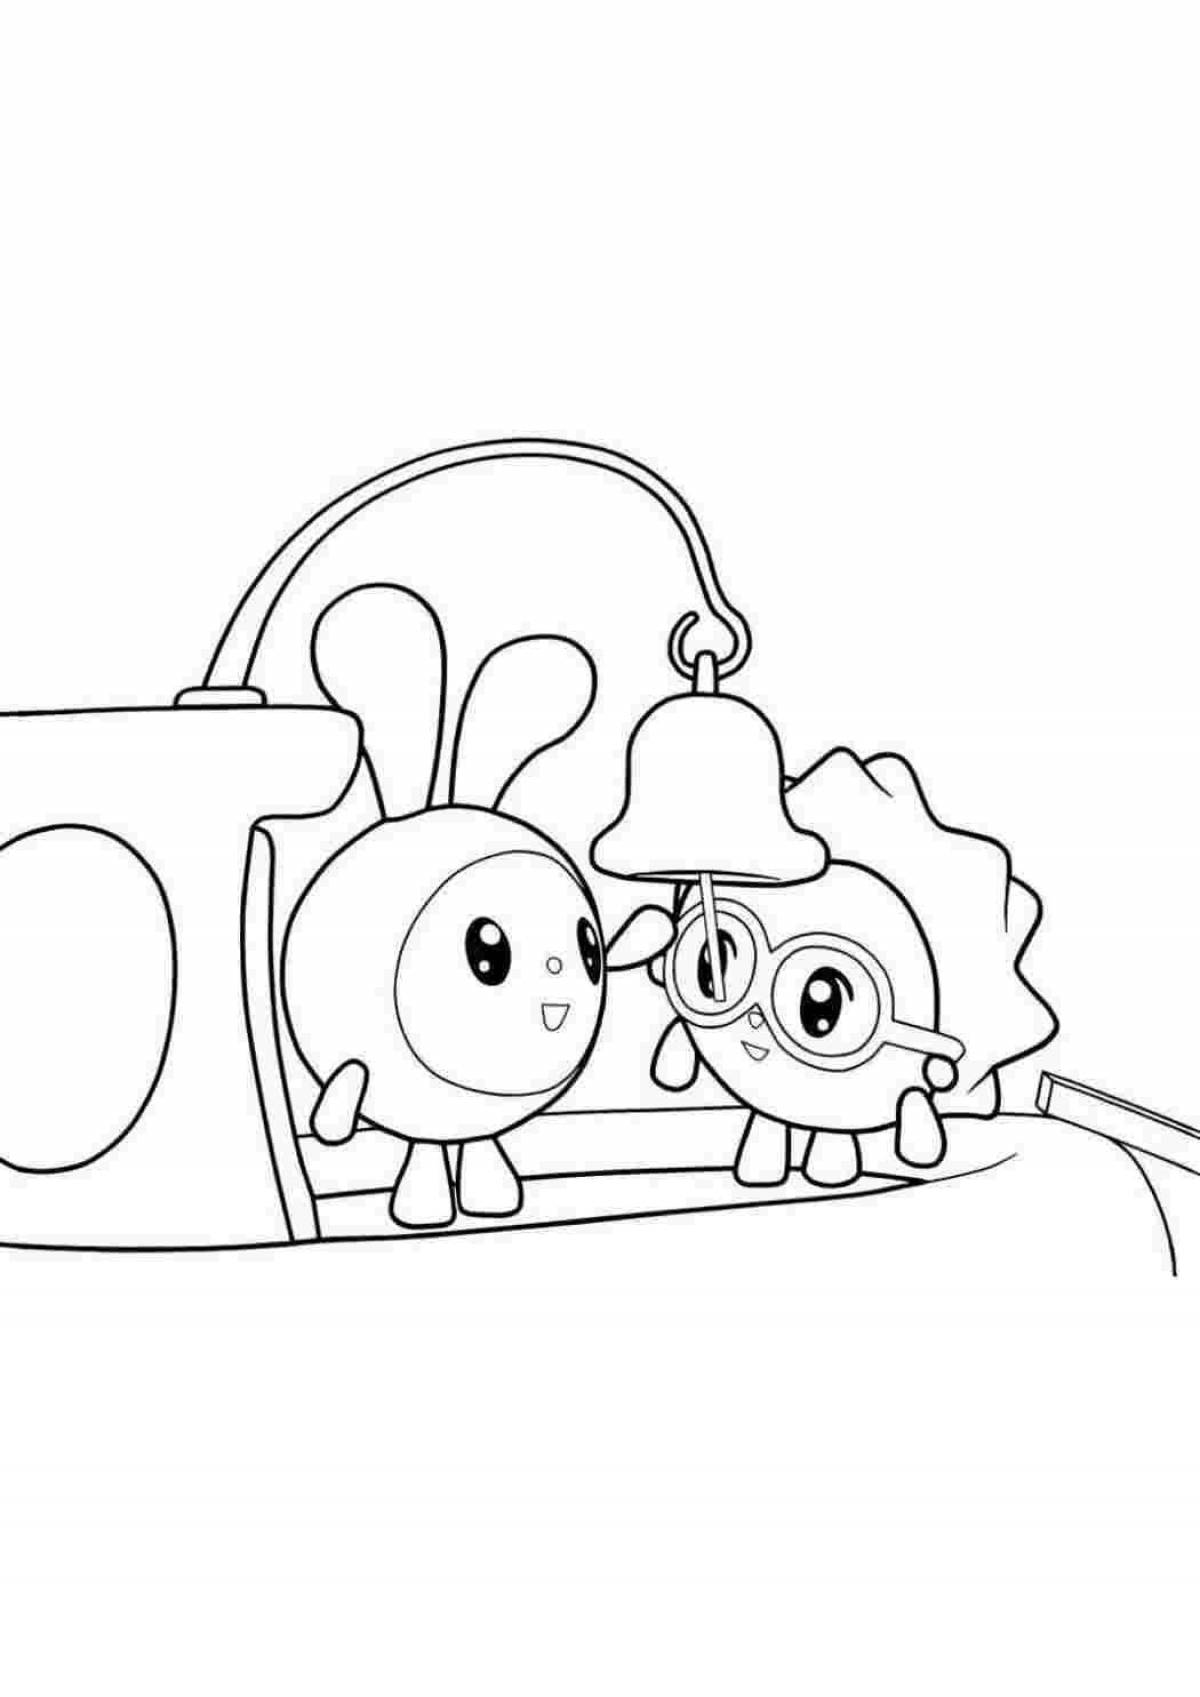 Animated bell coloring page for little kids